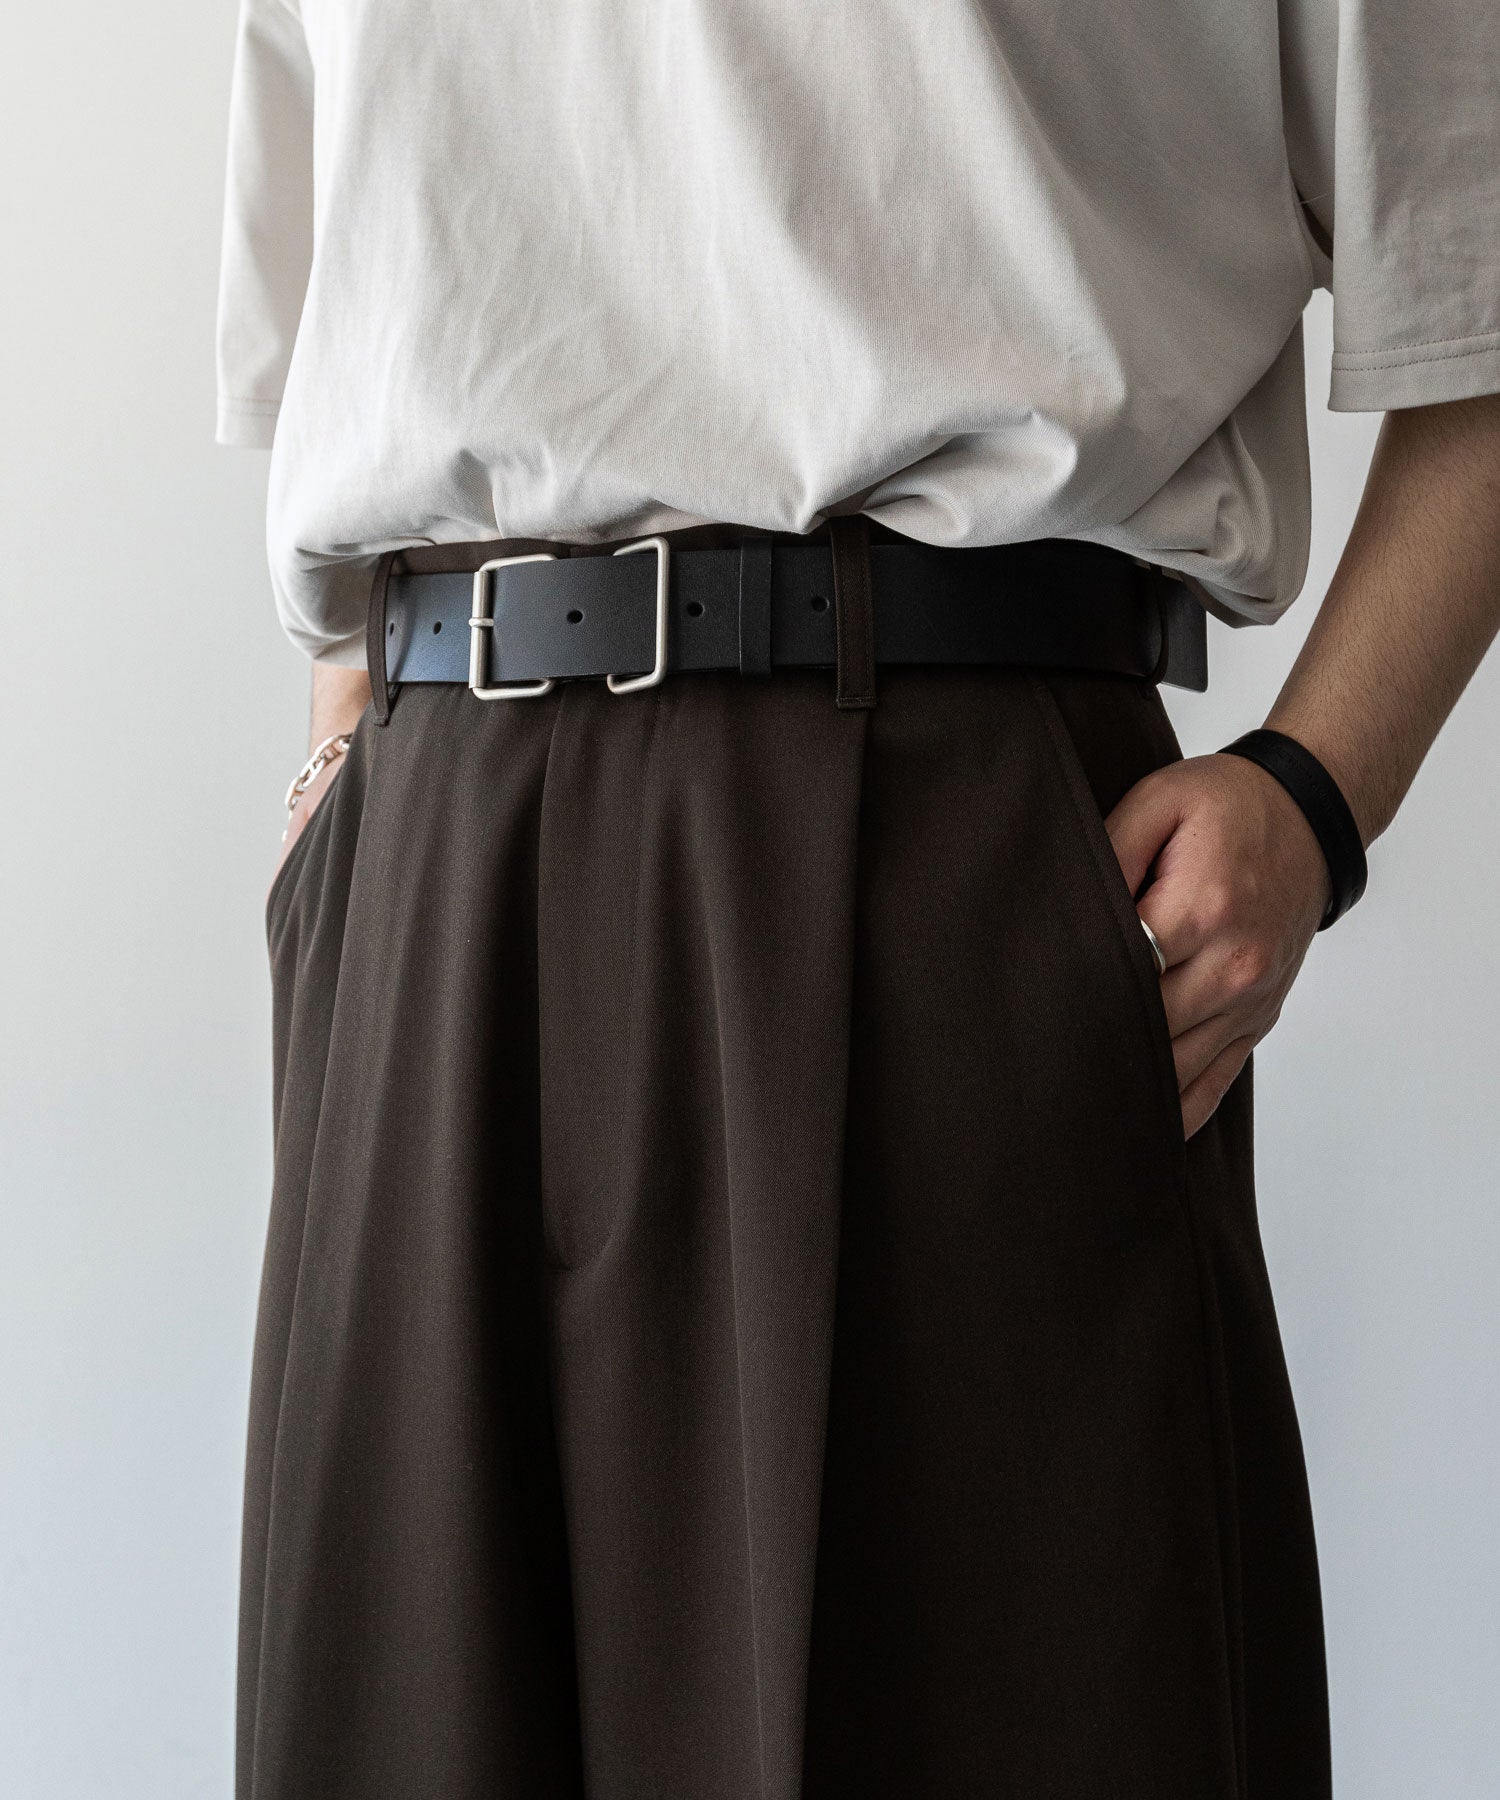 【stein】EXTRA WIDE TROUSERS シュタイン23aw sessionセッション福岡セレクトショップ 公式通販サイト